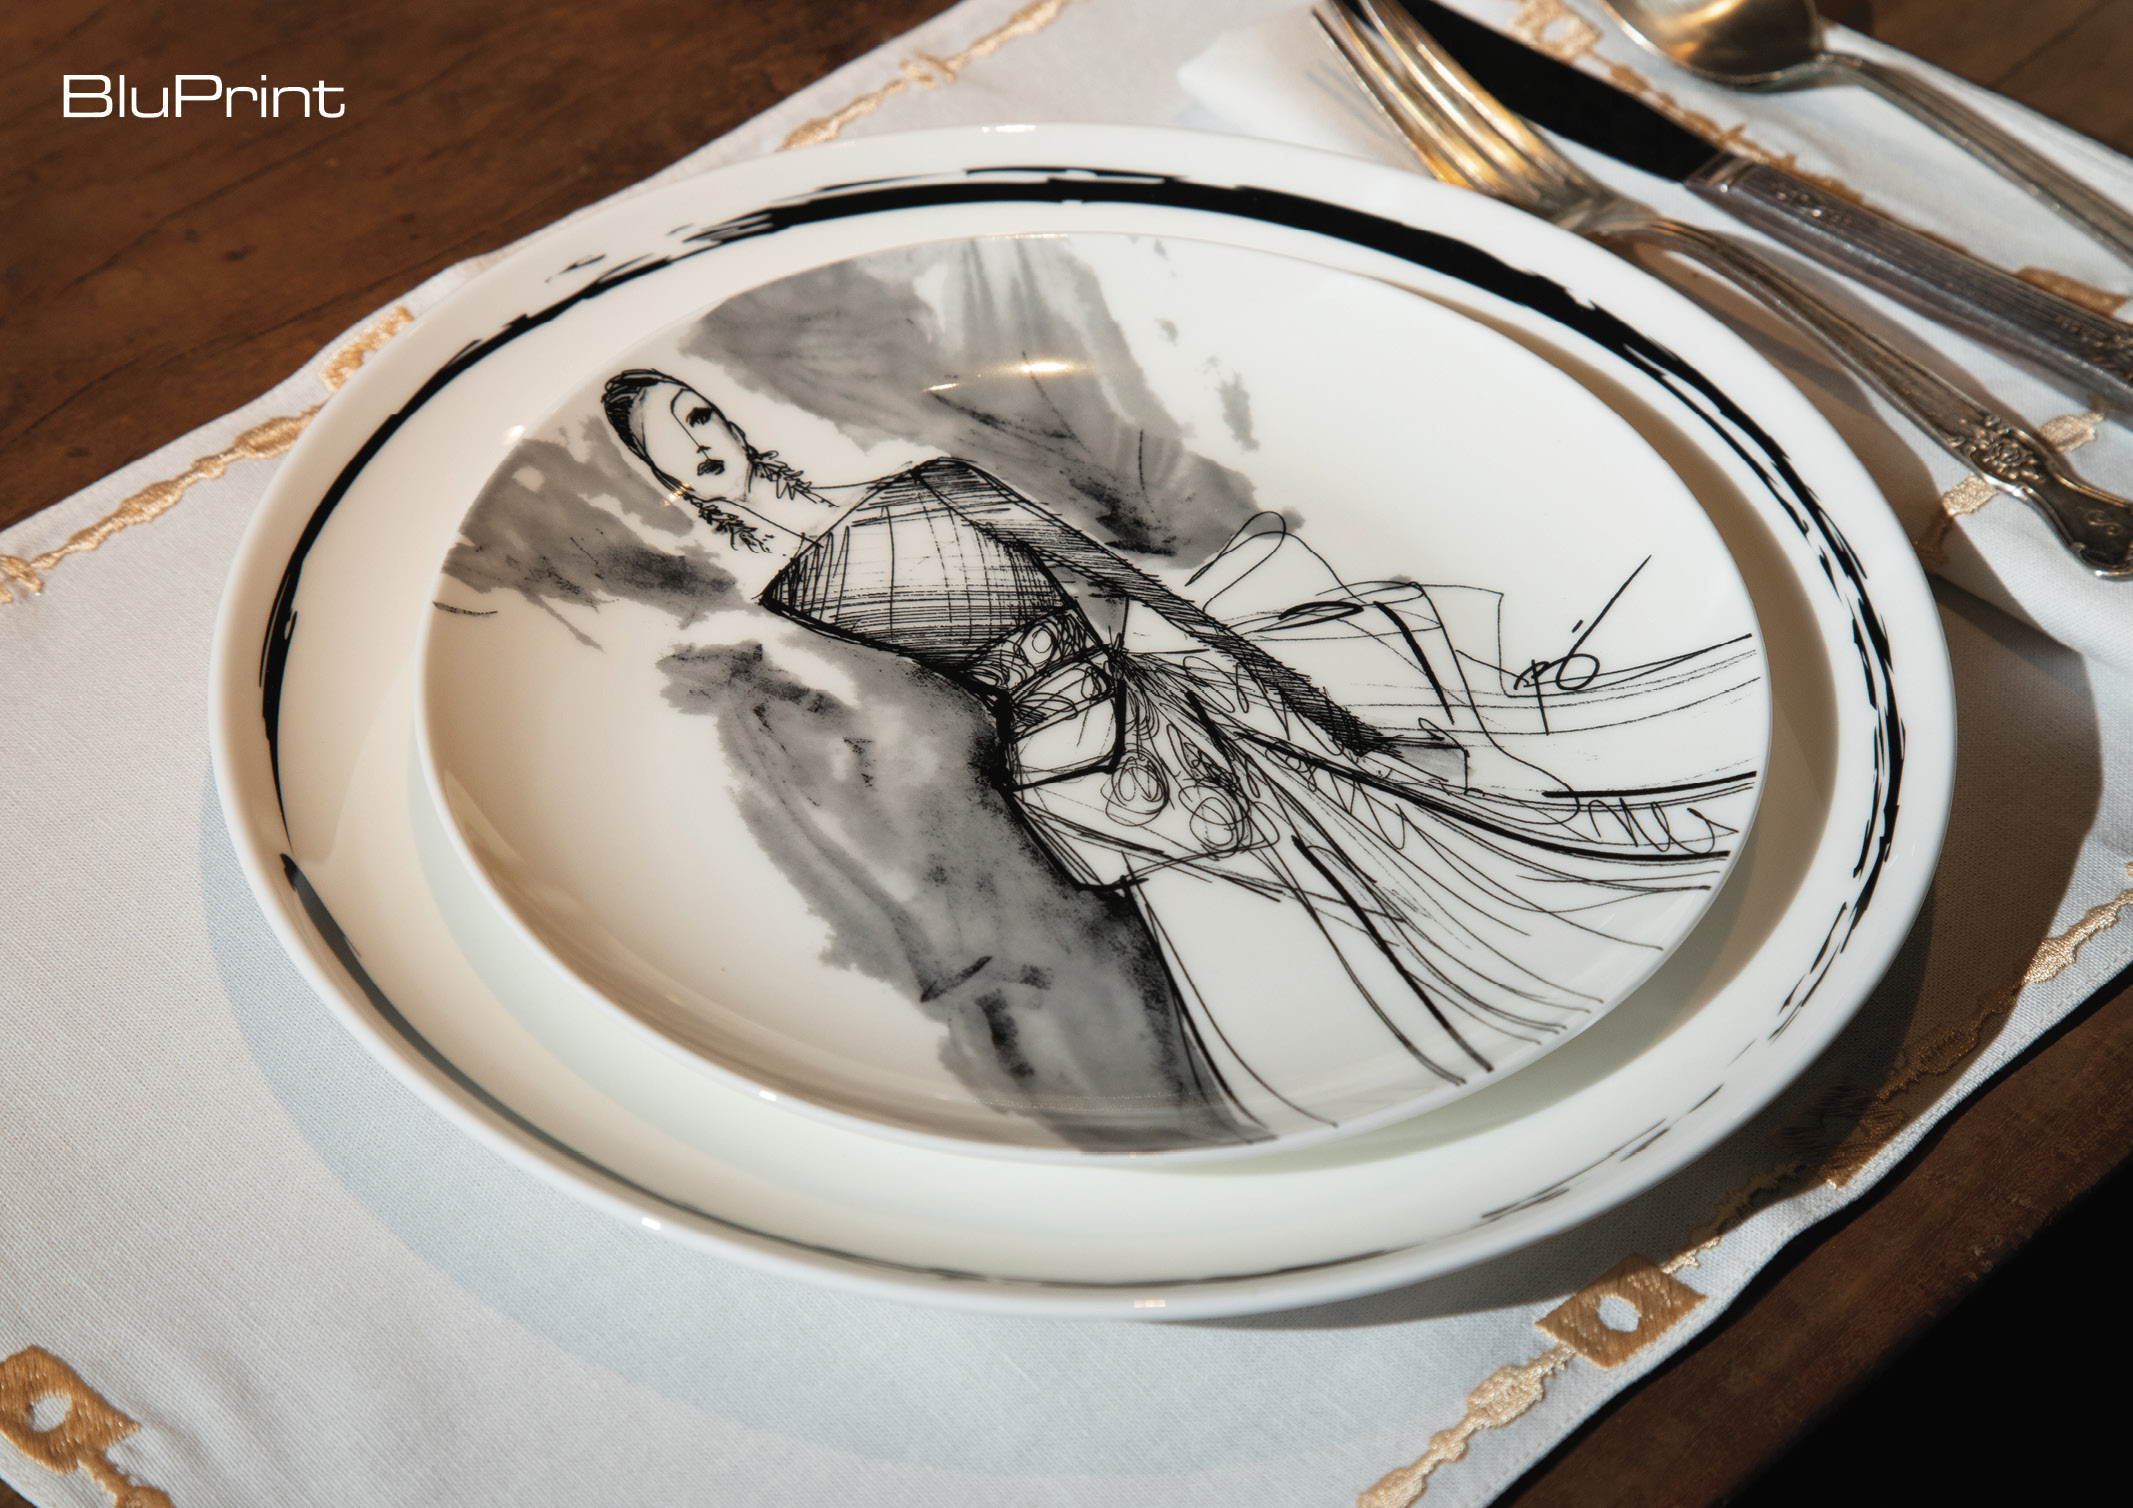 charger and plate featuring fashion illustration design by Rajo Laurel